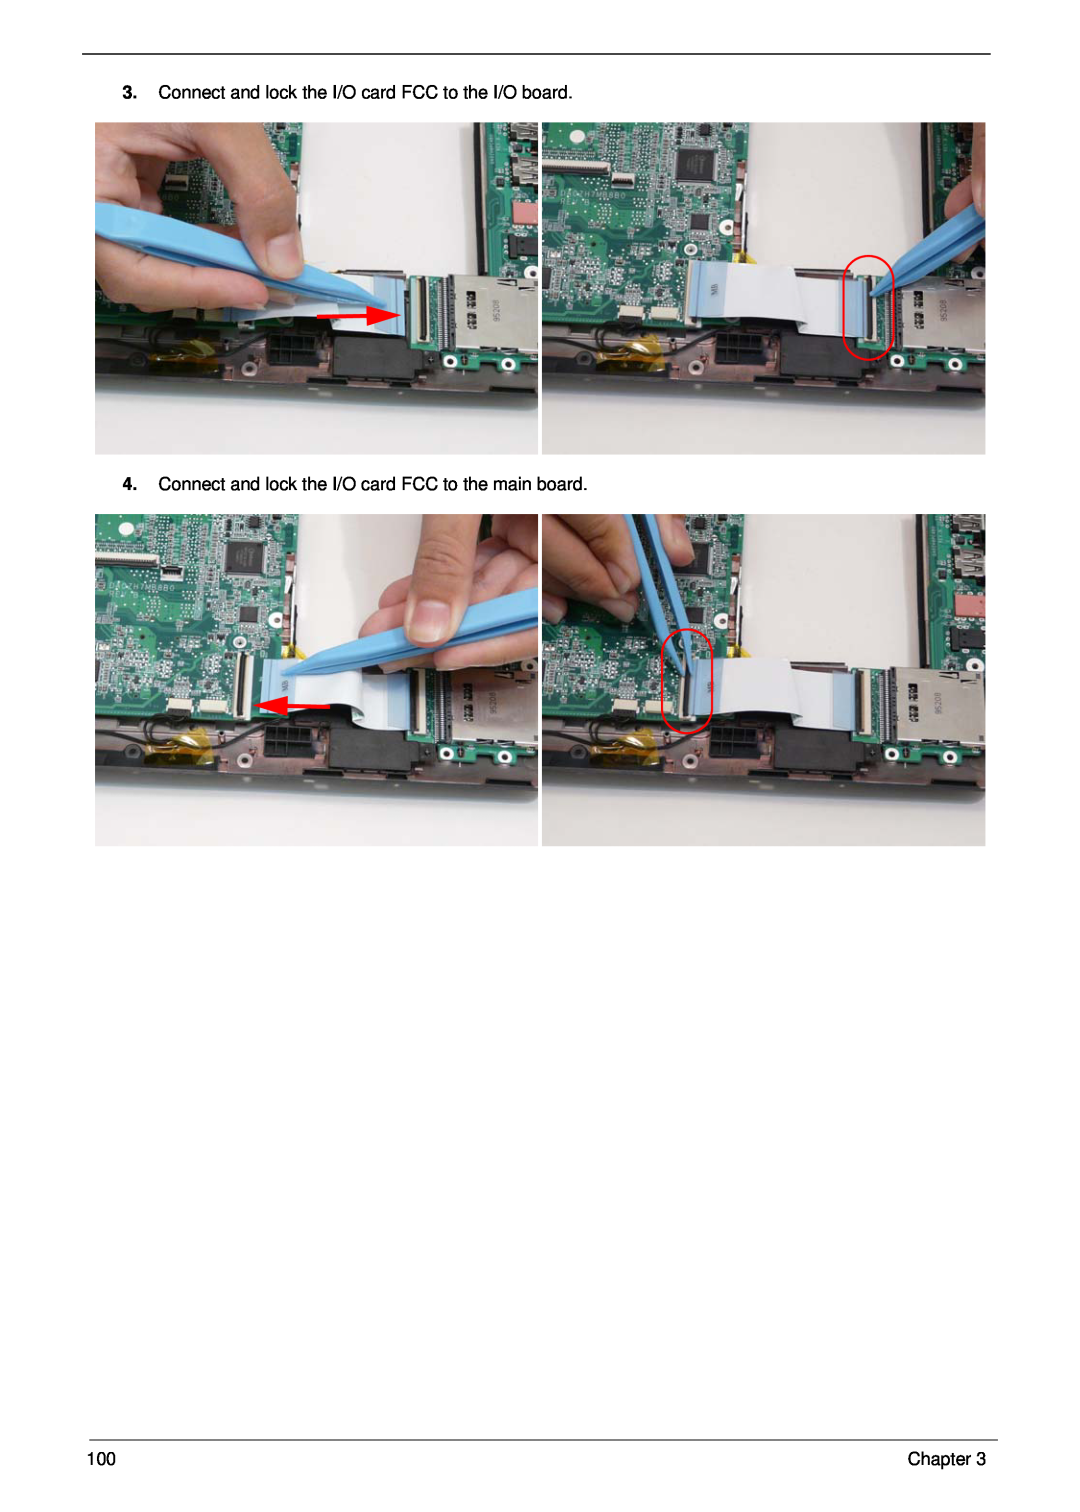 Gateway EC14 manual Connect and lock the I/O card FCC to the I/O board, Connect and lock the I/O card FCC to the main board 